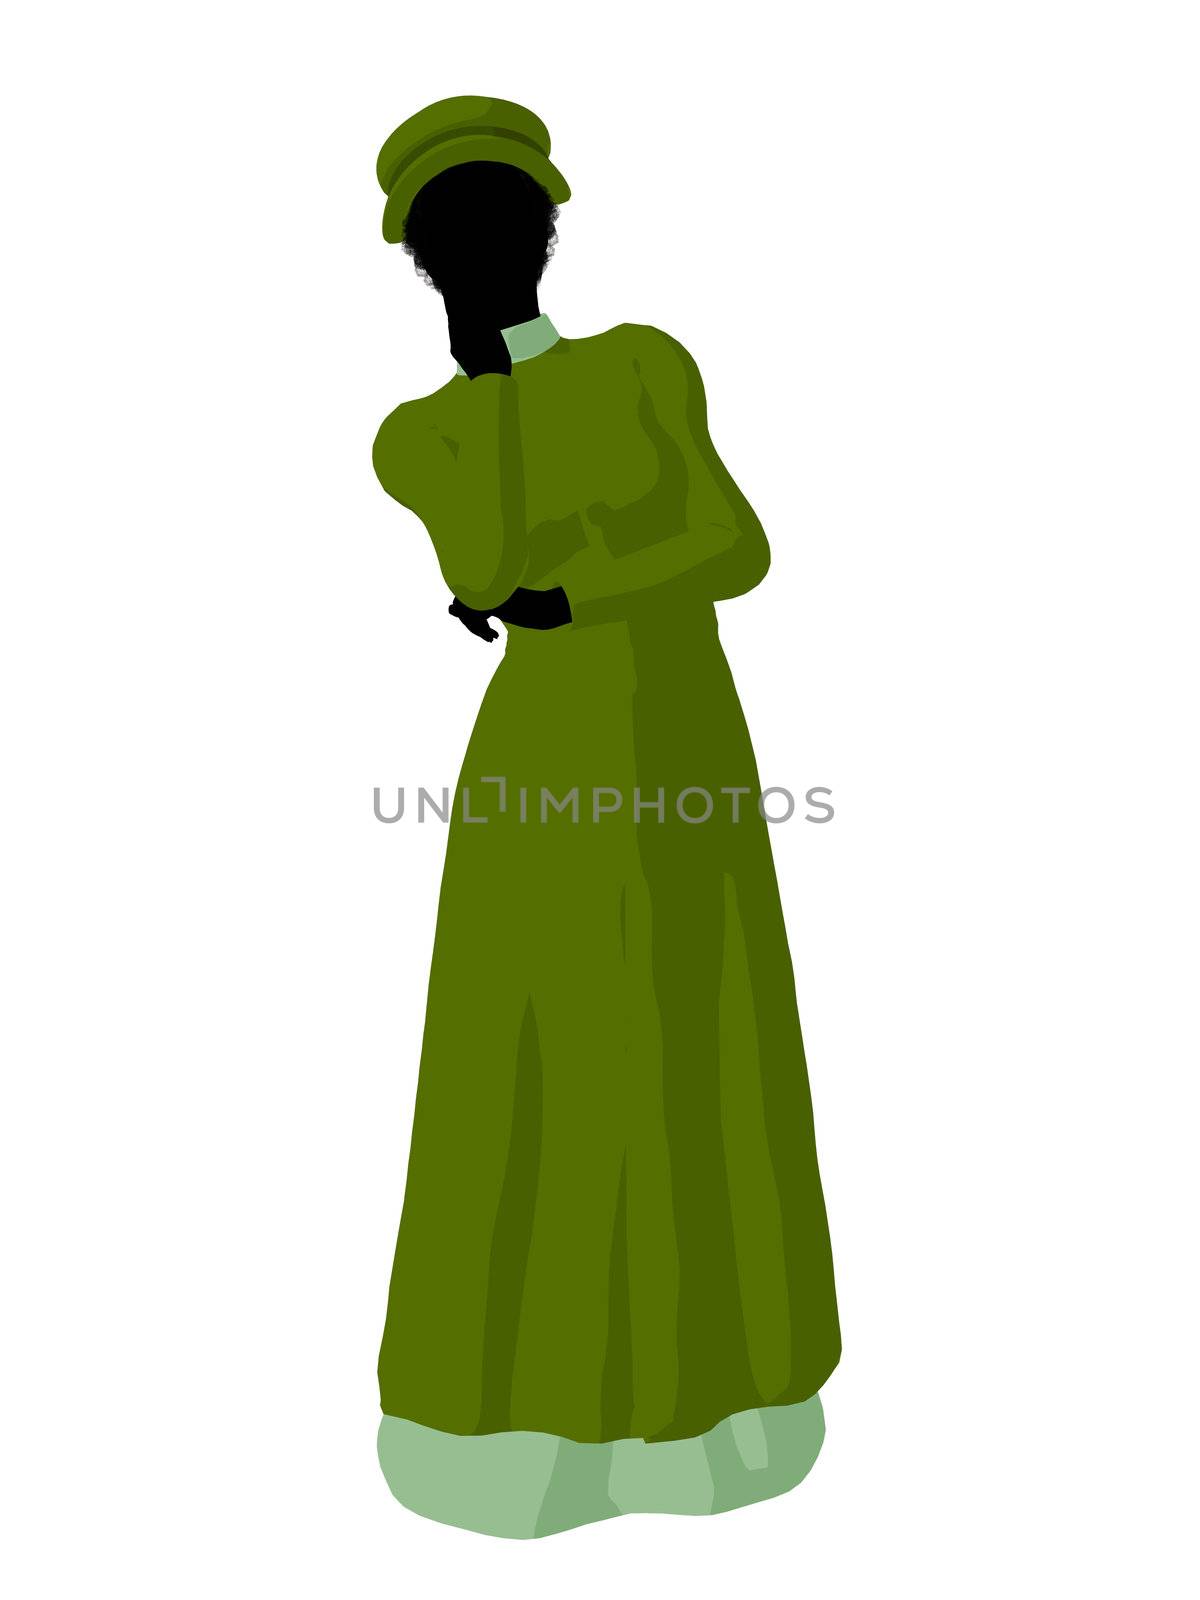 African american victorian woman art illustration silhouette on a white background